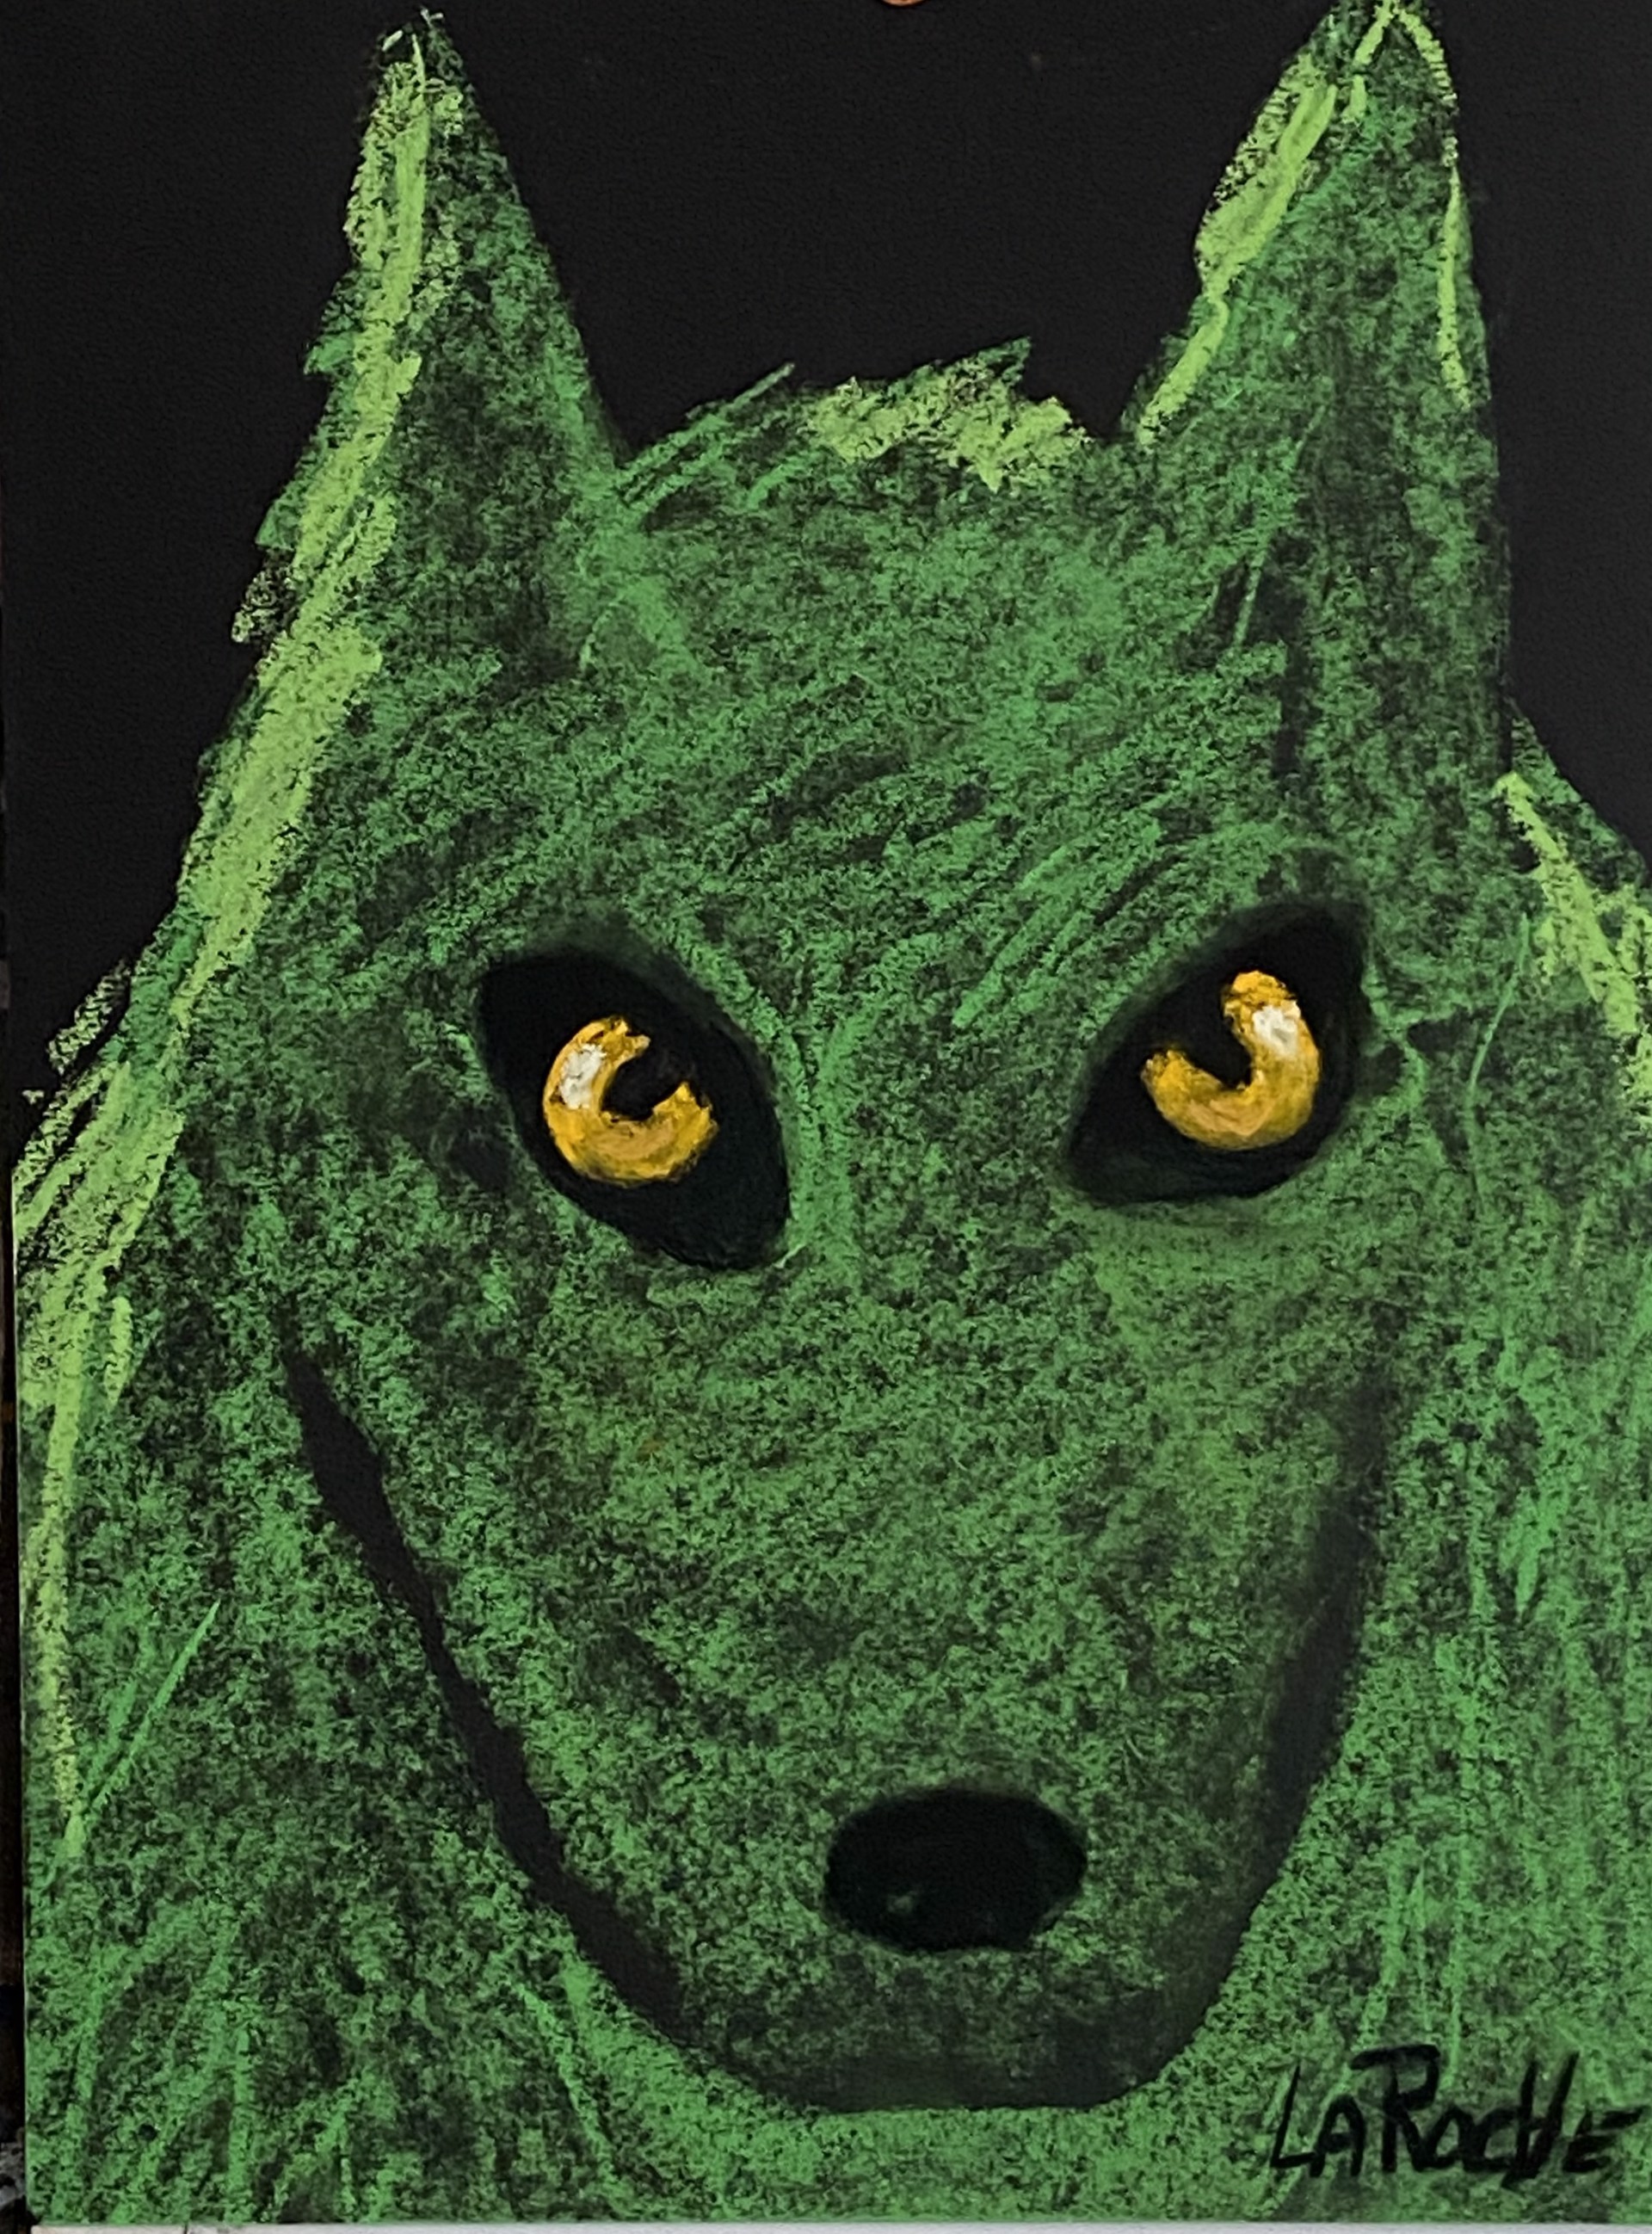 Young Green Wolf by Carole LaRoche